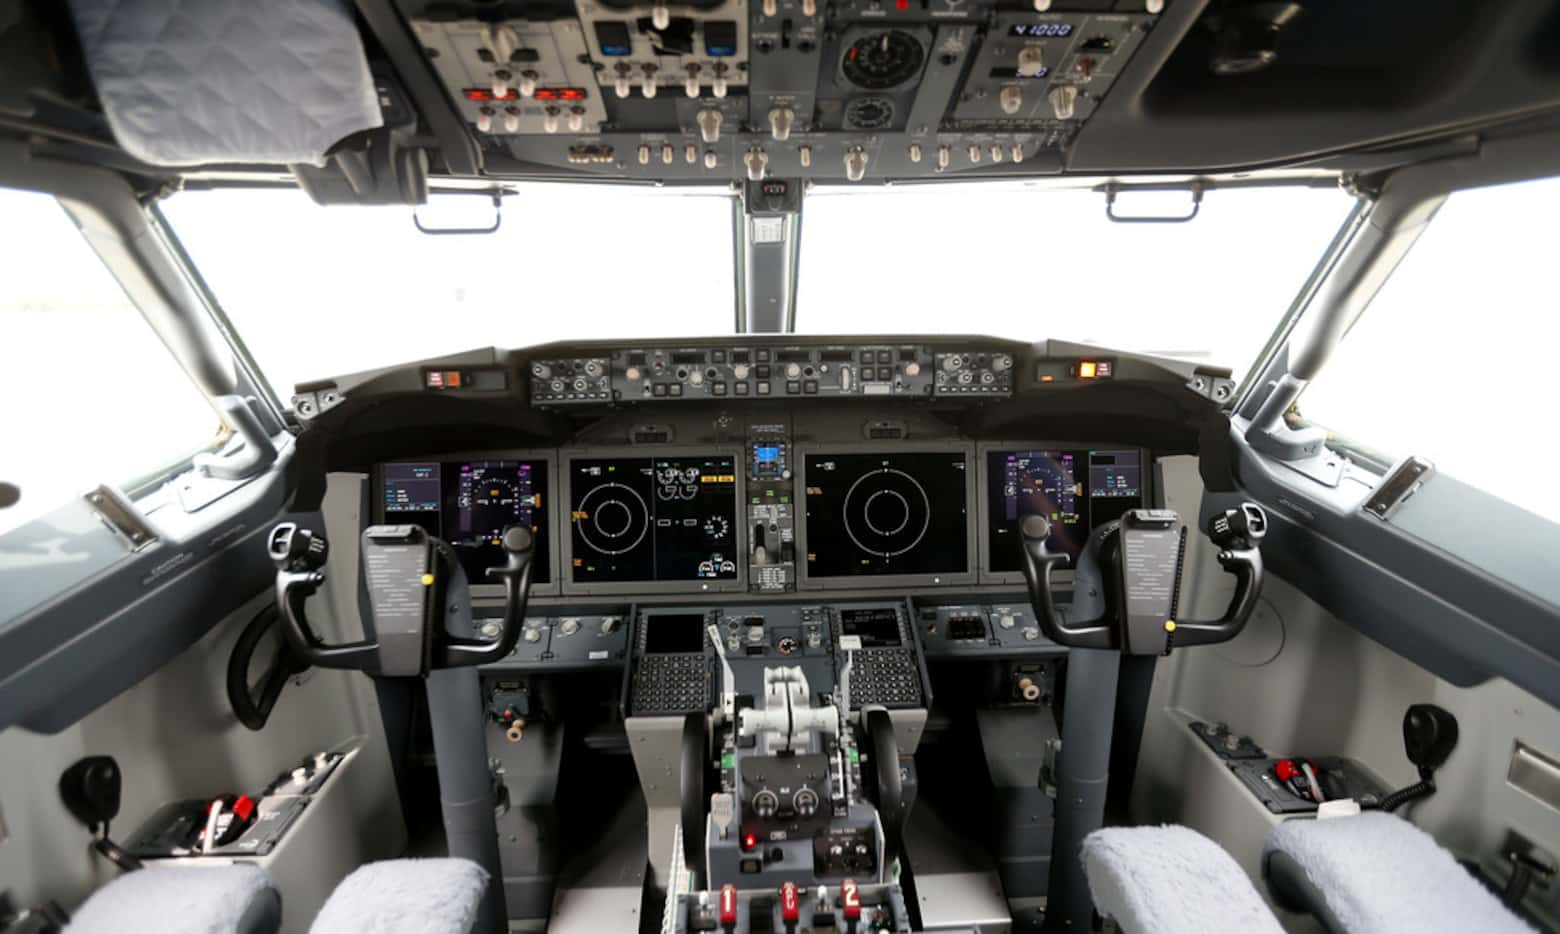 The cockpit of Southwest Airlines' new plane, the 737 Max.